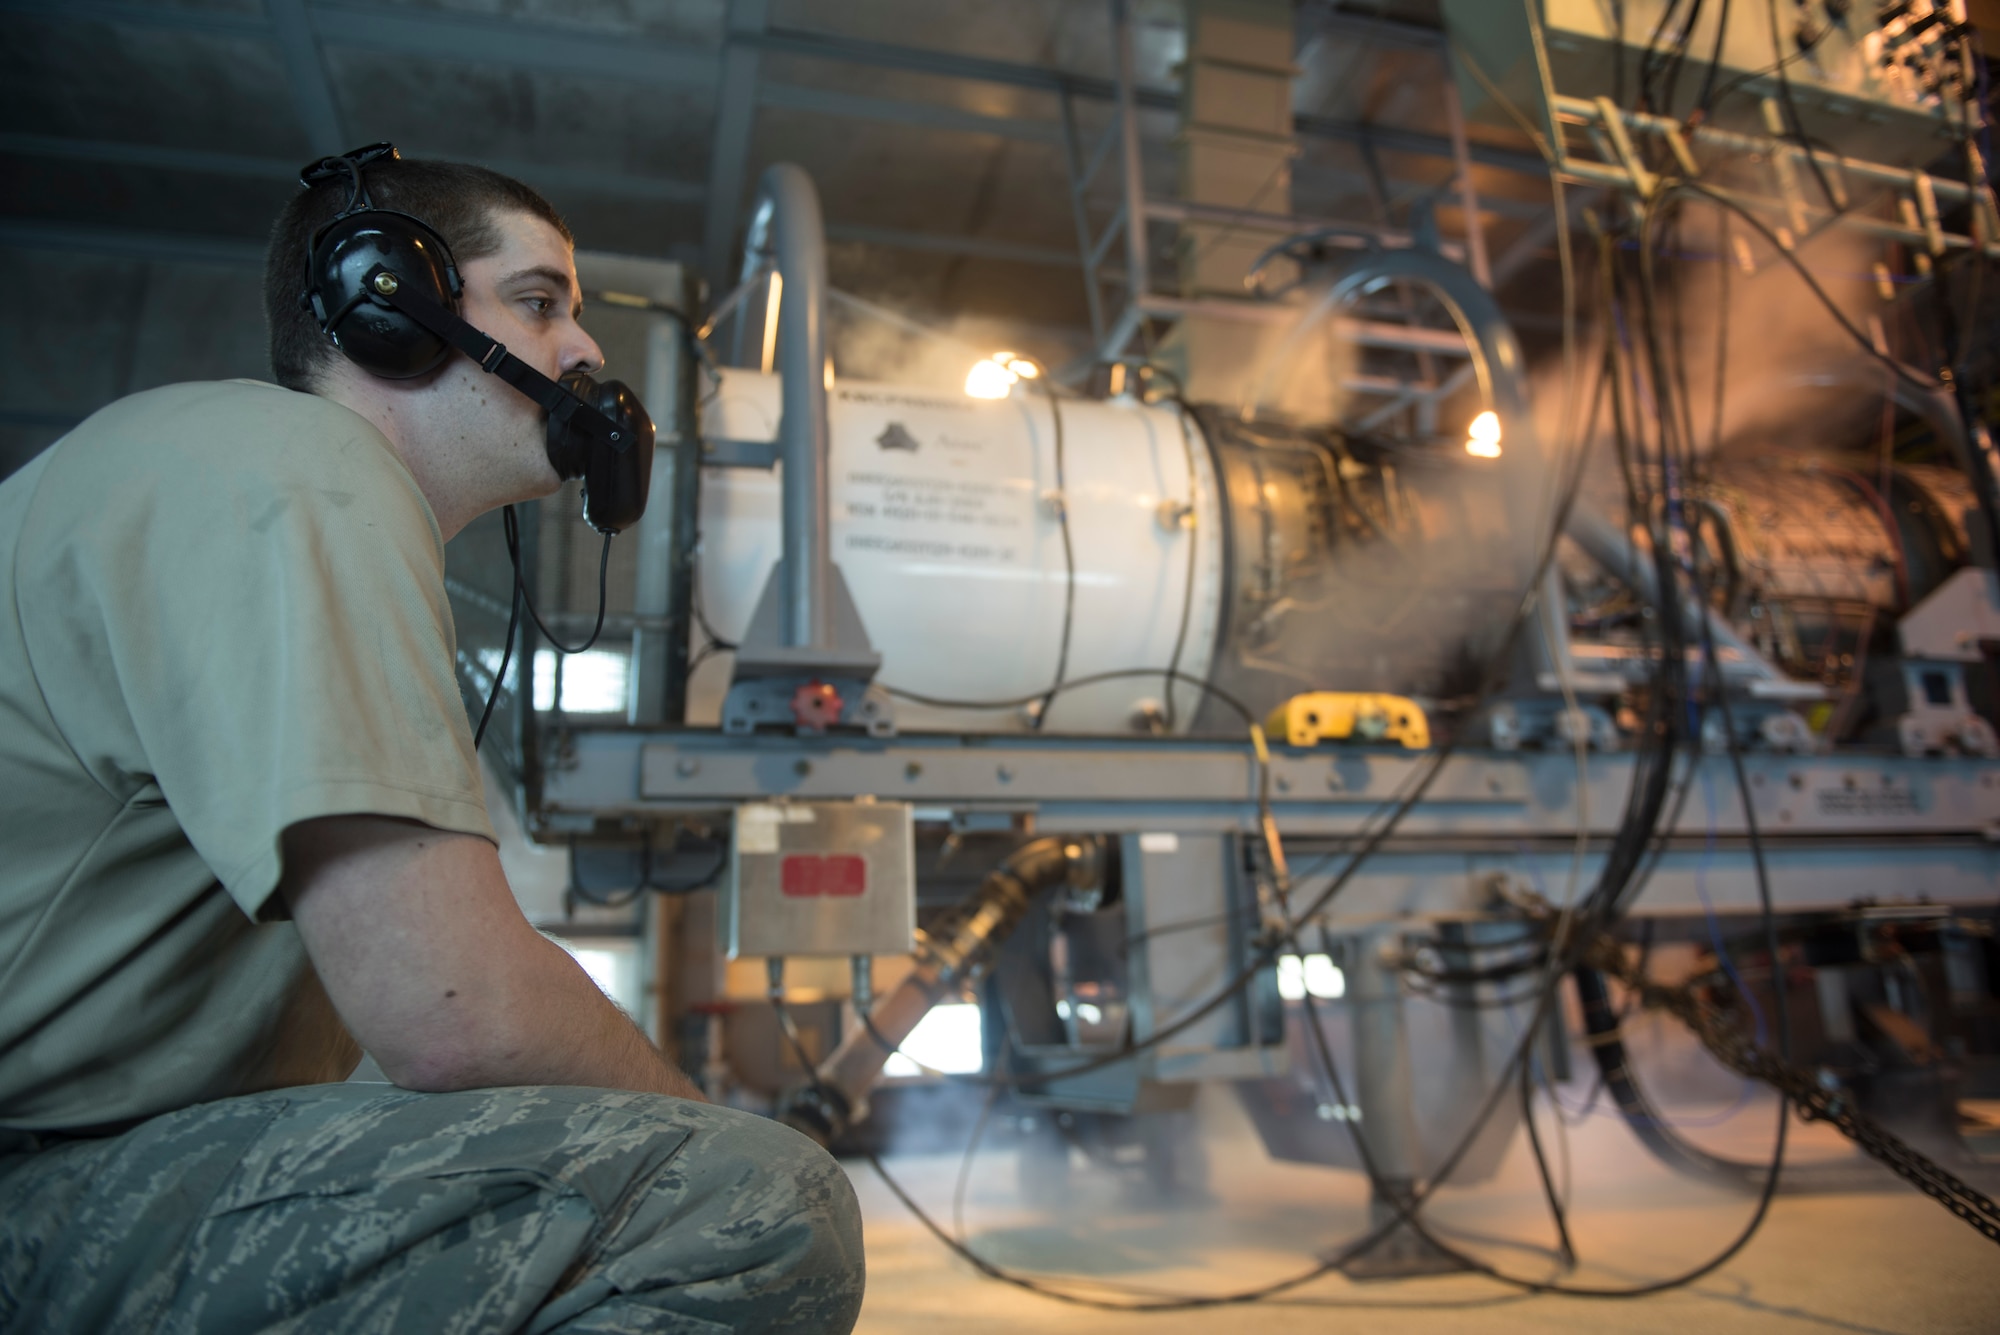 U.S. Air Force Staff Sgt. Donovan Walters, 18th Component Maintenance Squadron aerospace propulsion craftsman, performs an engine test March 10, 2017, at Kadena Air Base, Japan. Units are tested for a variety of reasons, particularly when major components have been replaced. This testing helps to run new parts through the old system for functionality. (U.S. Air Force photo by Airman 1st Class Quay Drawdy)